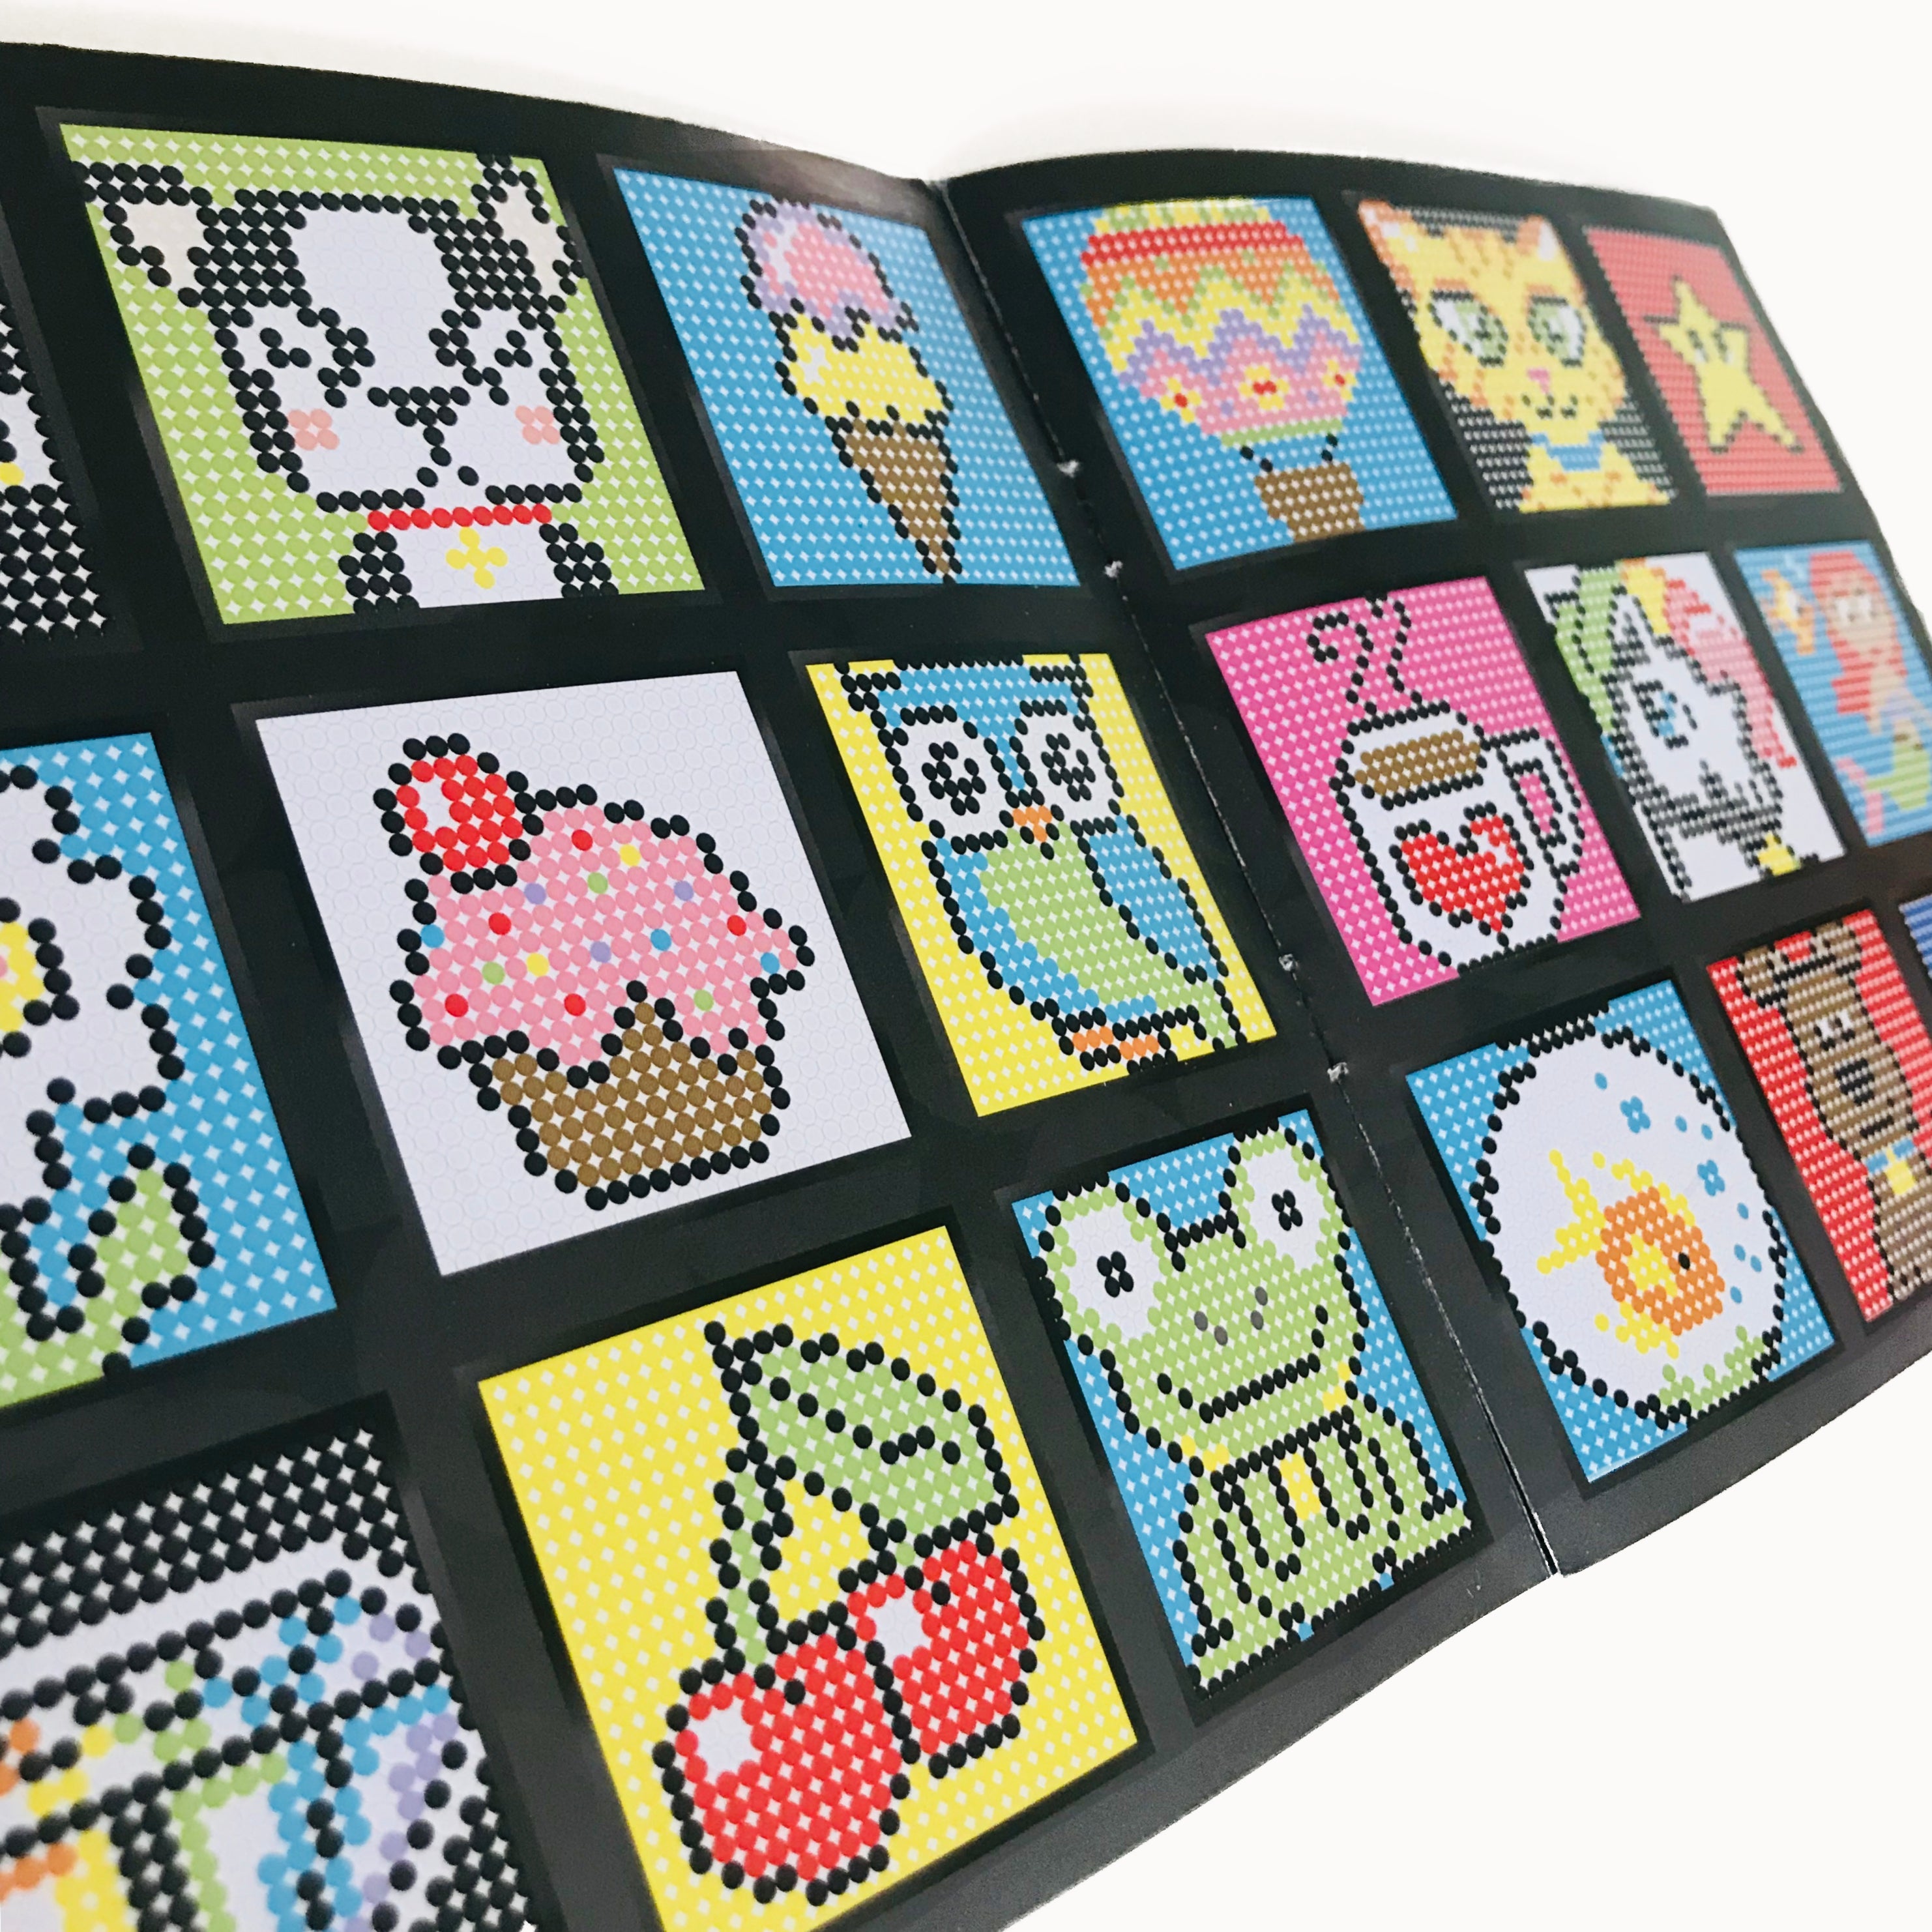  Pix Perfect Pixel Art Kit for Fans of Pixel Art, Perler Beads,  Crafts or Sequins. 20 Colors, 50+ Design Ideas, Hours of Creative Fun! :  Arts, Crafts & Sewing